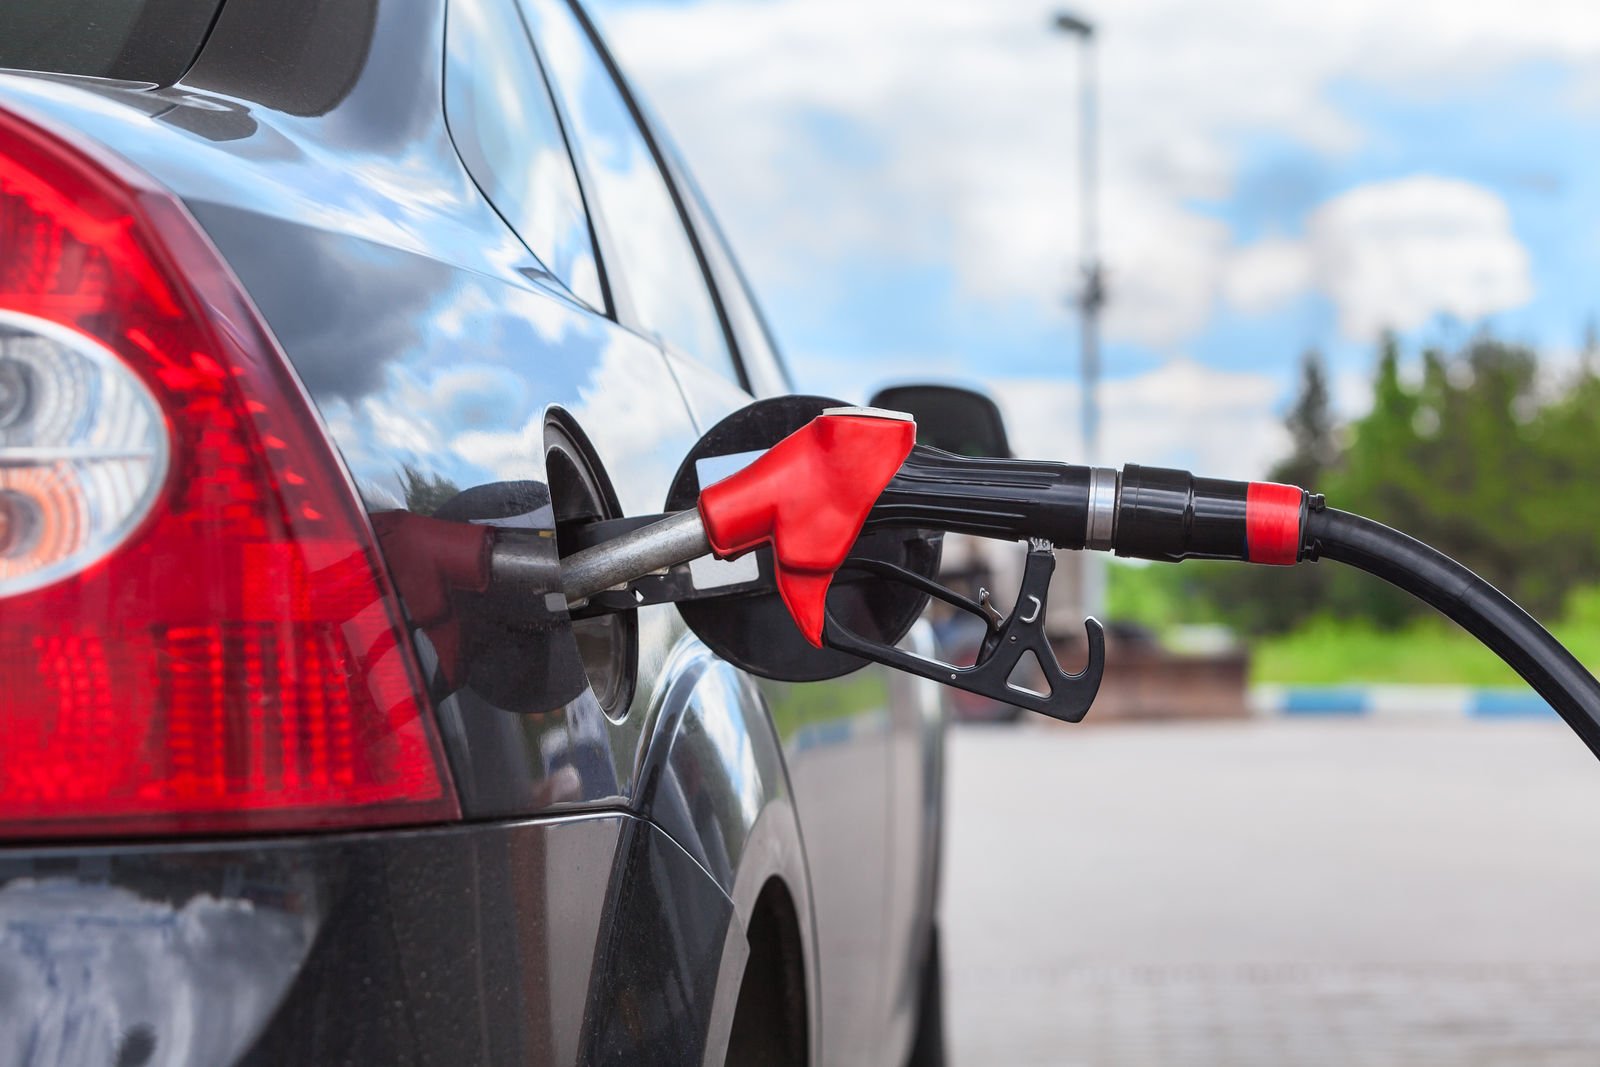 Does car insurance cover using the wrong fuel?